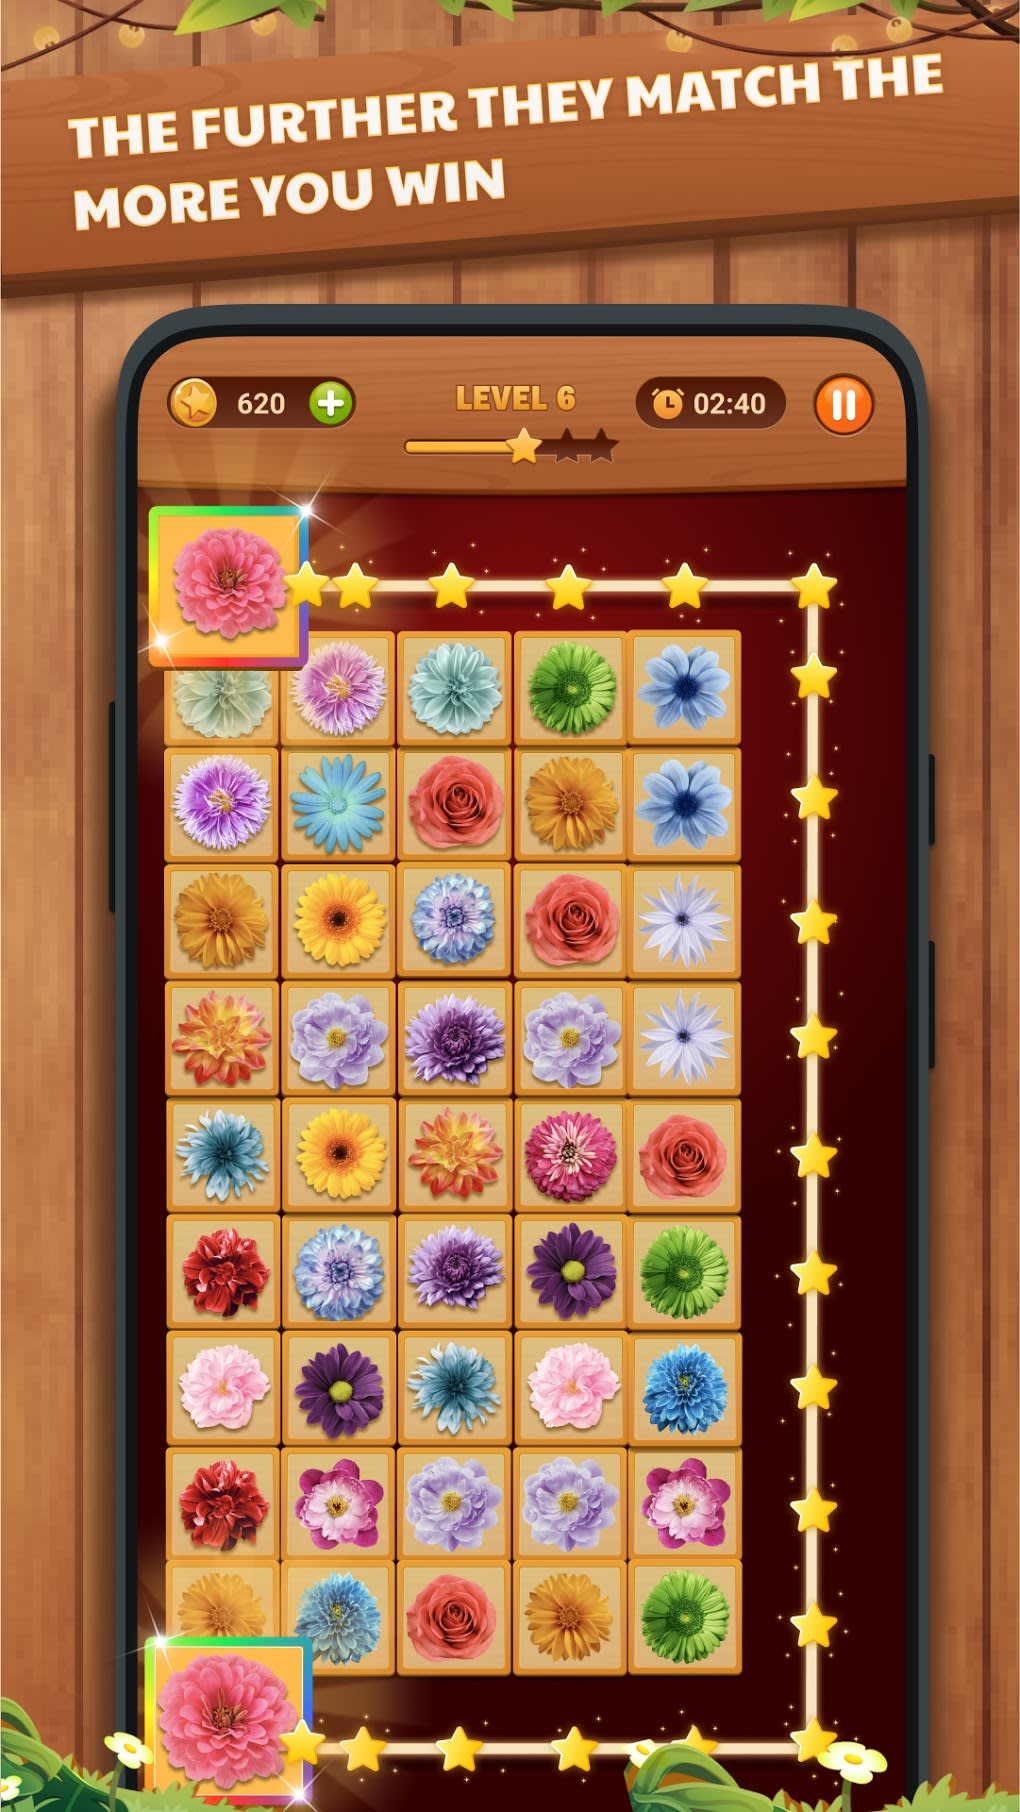 Onet Puzzle - Free Memory Tile Match Connect Game APK para Android